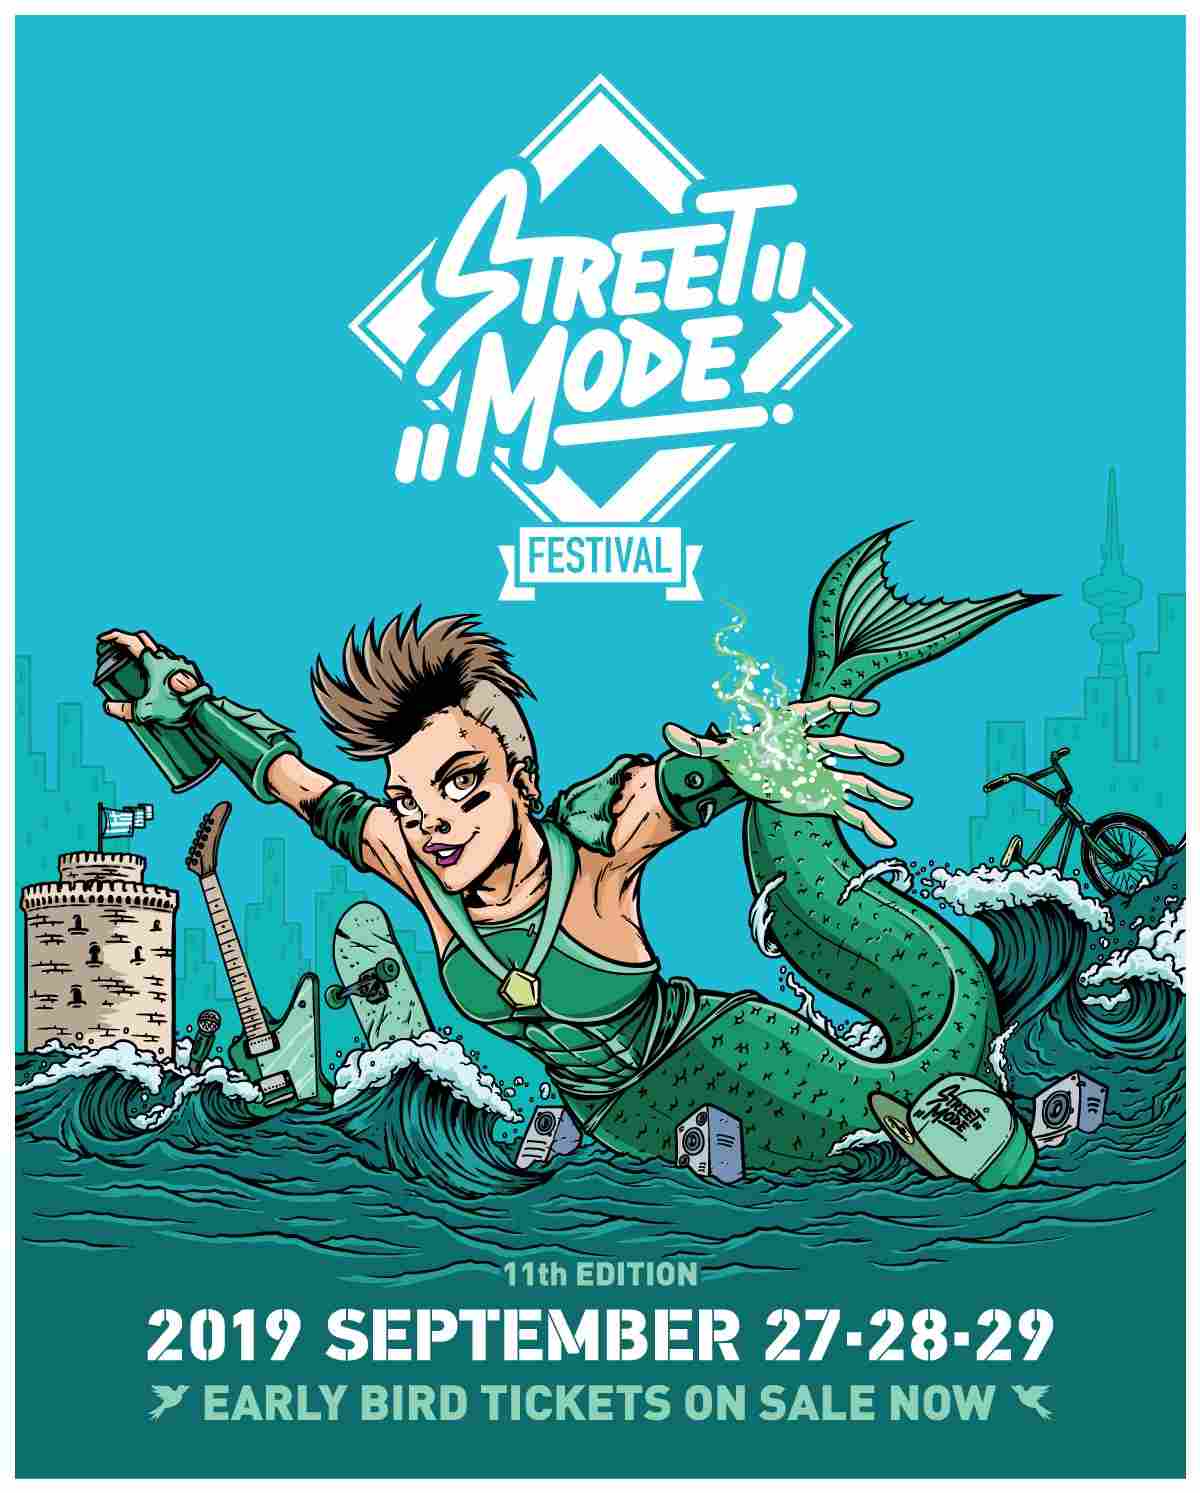 streetmode 190319 poster